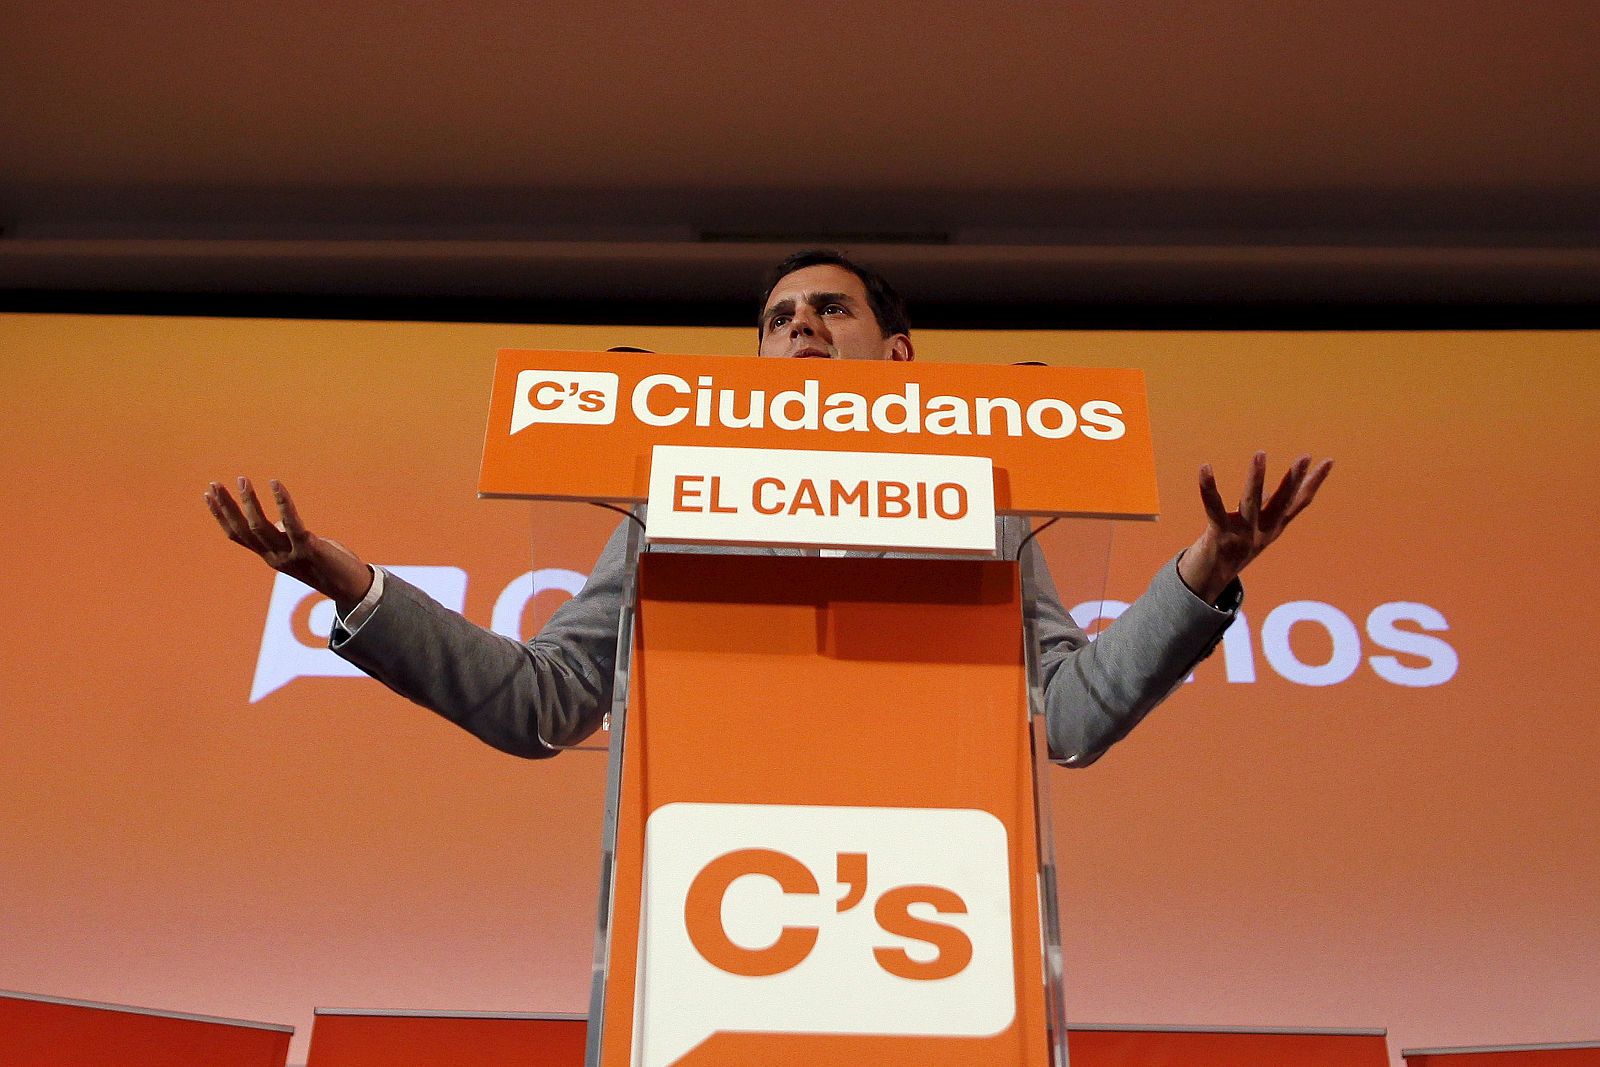 Ciudadanos' party leader Rivera gestures as he delivers a speech during an electoral campaign rally in Malaga